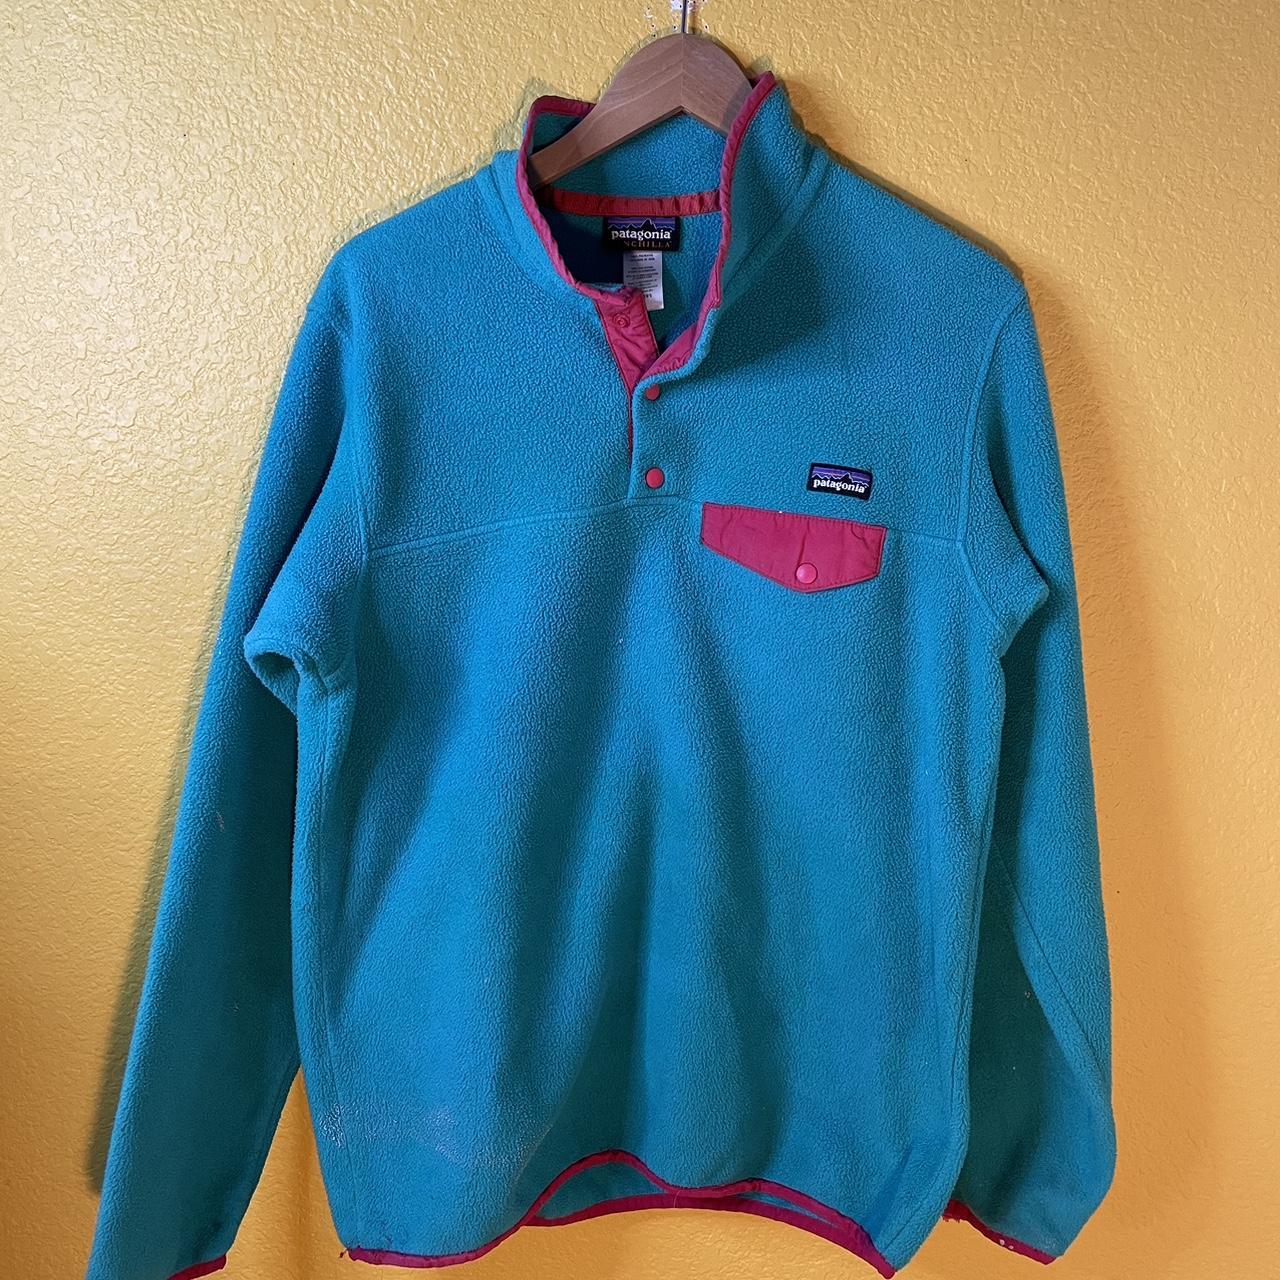 Patagonia Fleece Sweater Size Womens Large Cond... - Depop